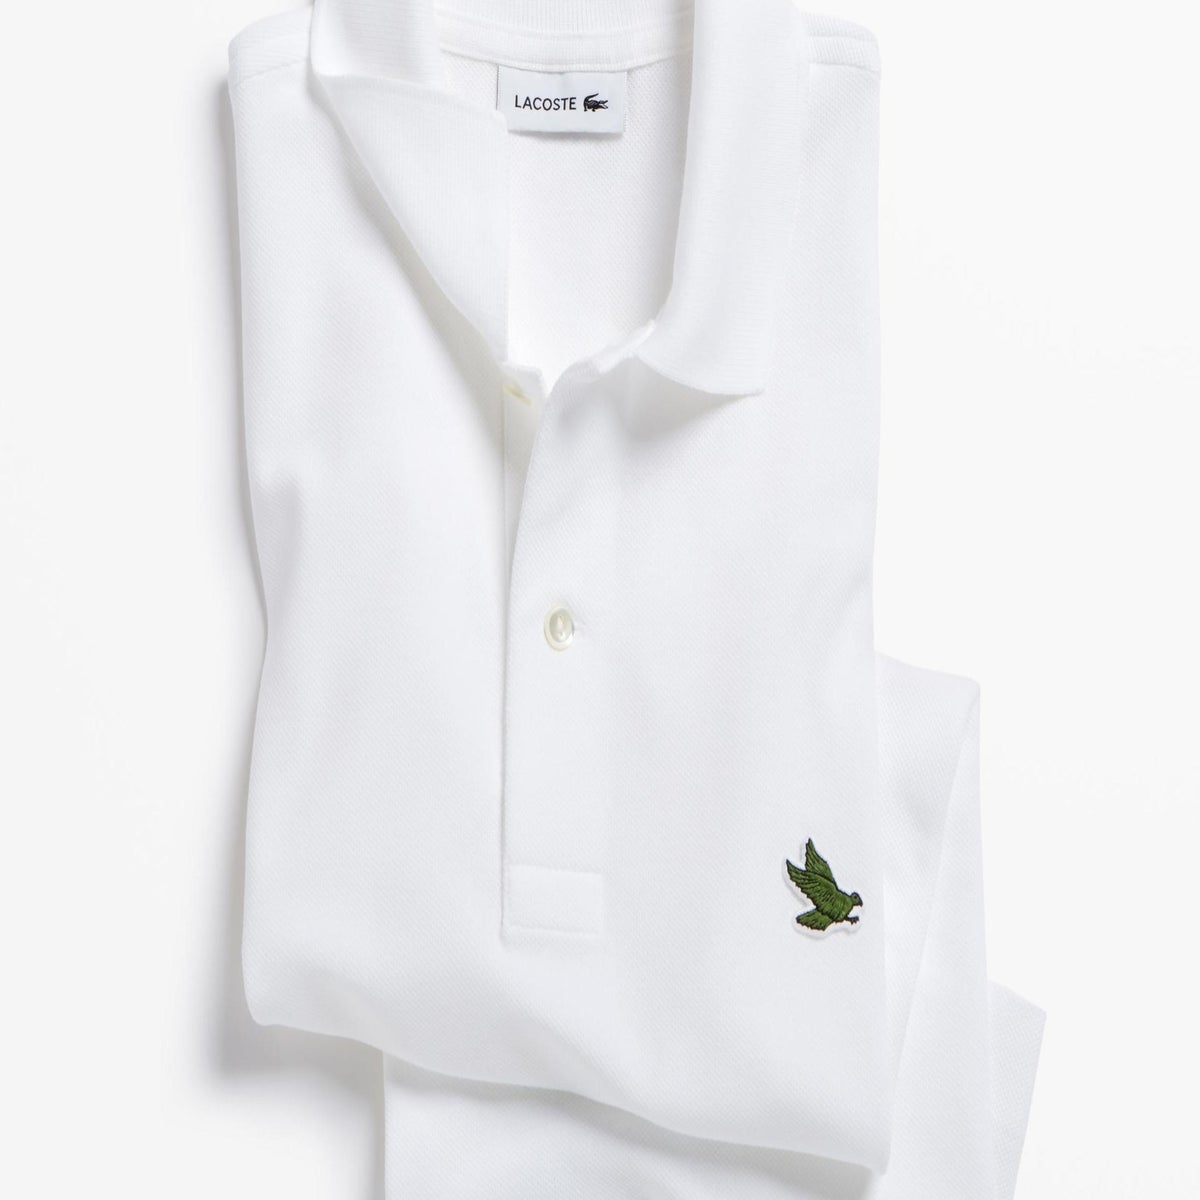 Trolley Udvikle Arbejdskraft Lacoste replaces iconic crocodile logo with endangered species as part of  conservation campaign | The Independent | The Independent